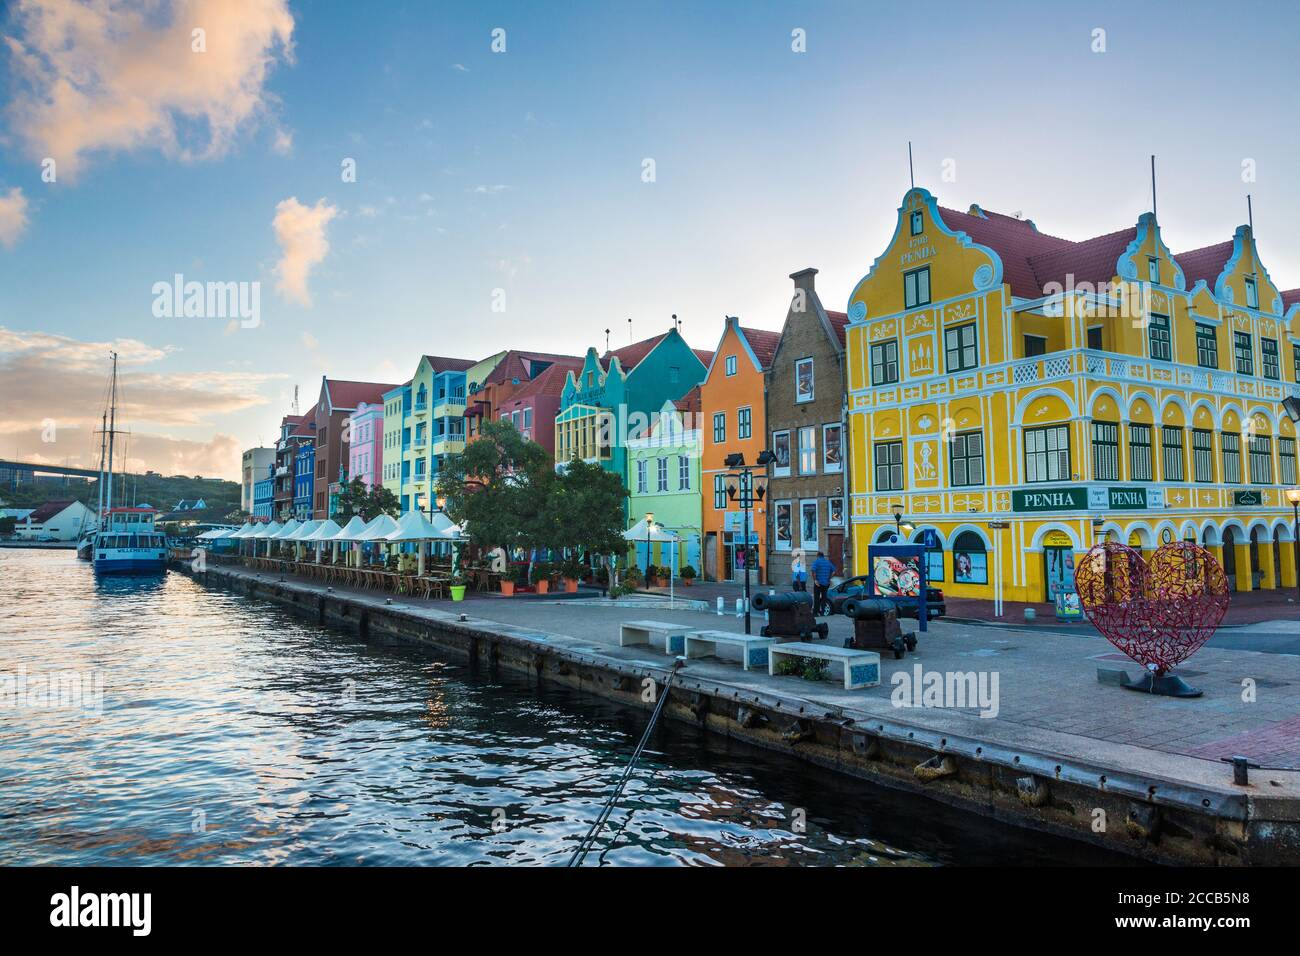 Early morning view of the Punda waterfront in Willemstad, the capital city of Curacao.  Traditional Dutch colonial-style buildings face the Saint Anna Stock Photo